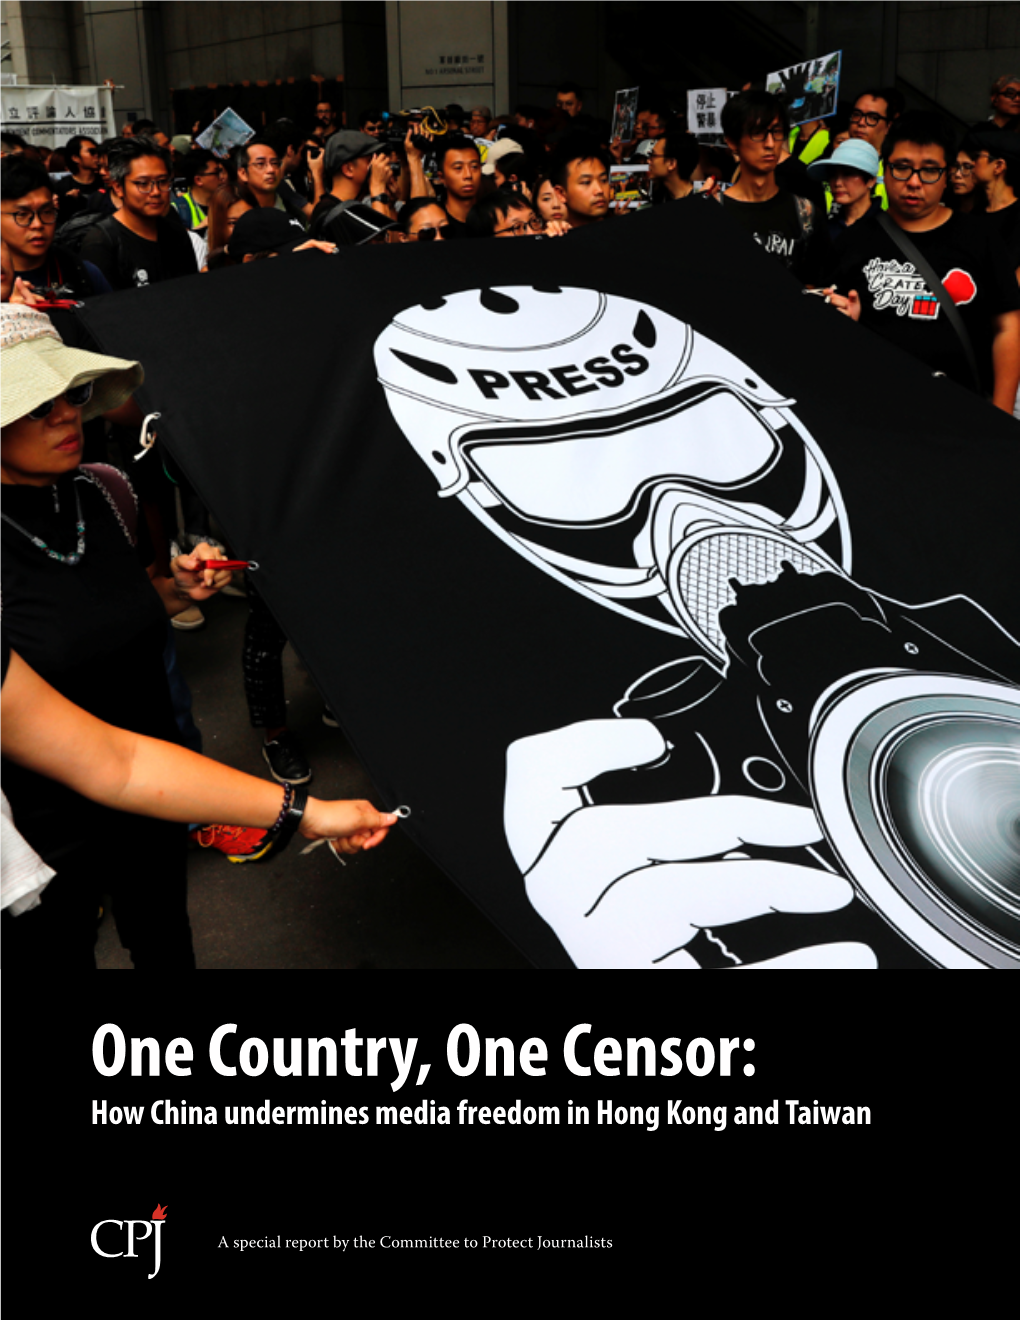 One Country, One Censor: How China Undermines Media Freedom in Hong Kong and Taiwan